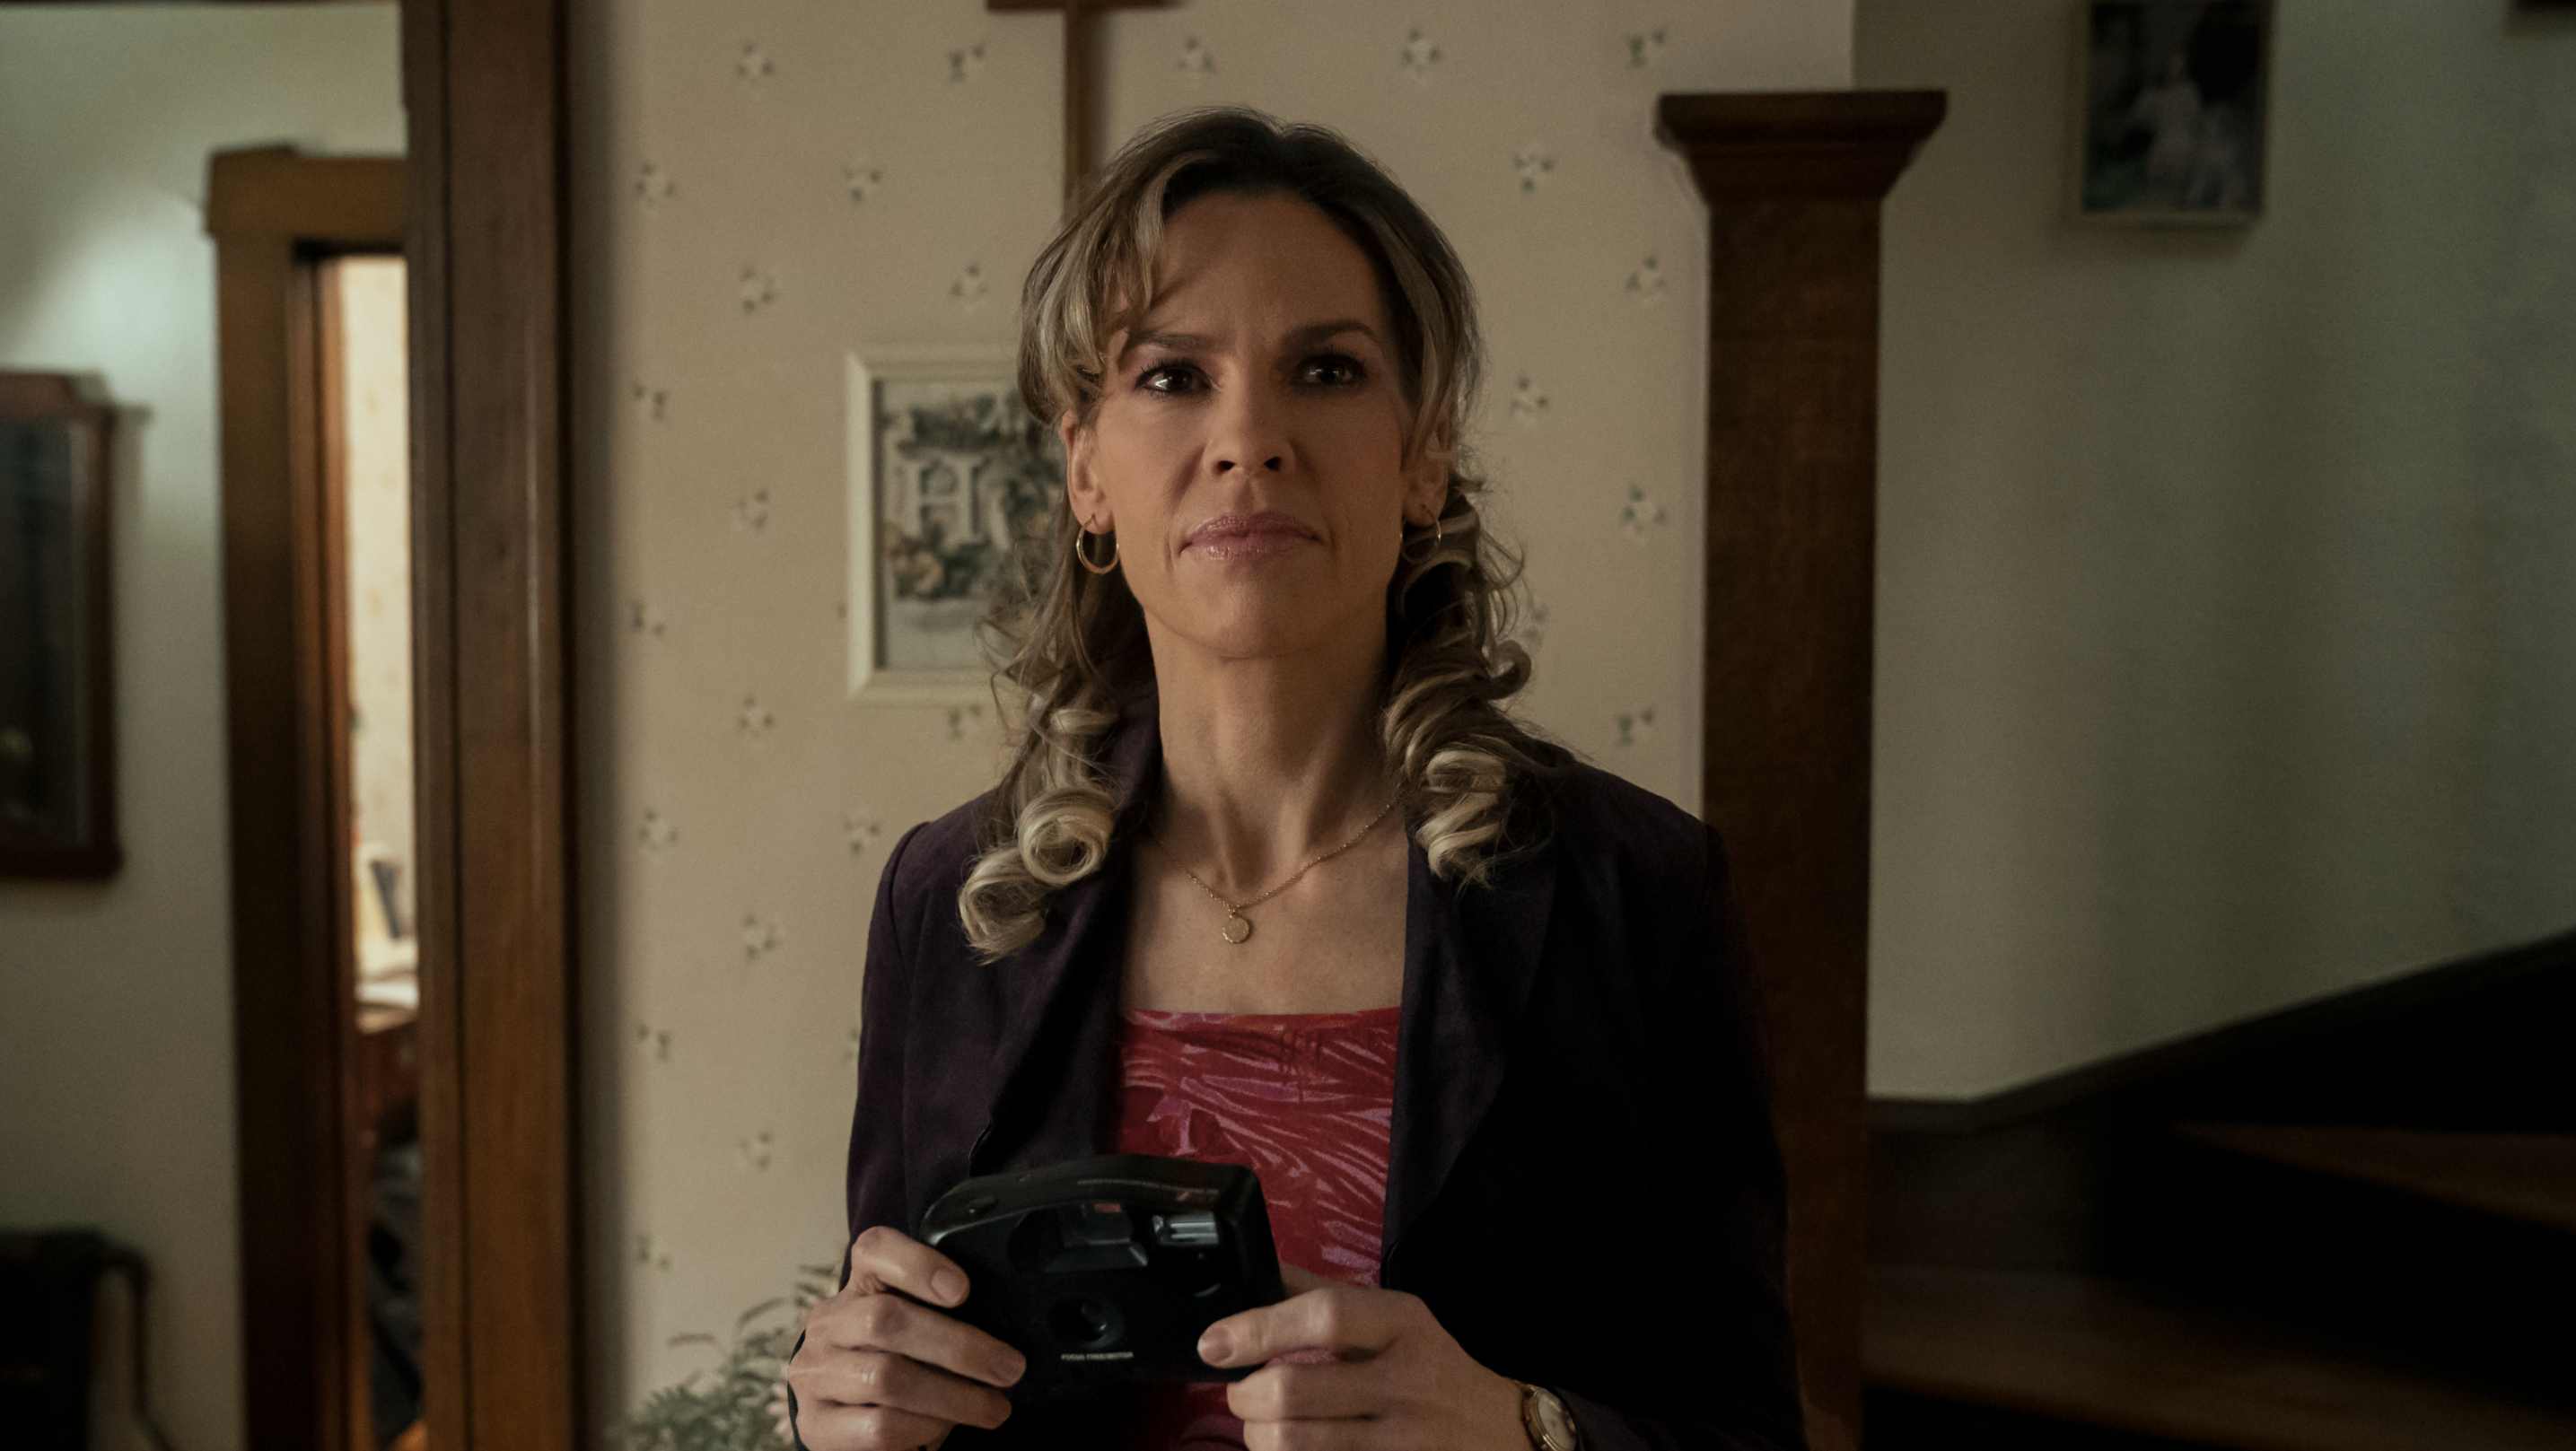 Interview: Hilary Swank on 'Blessing' of 'Ordinary Angels'